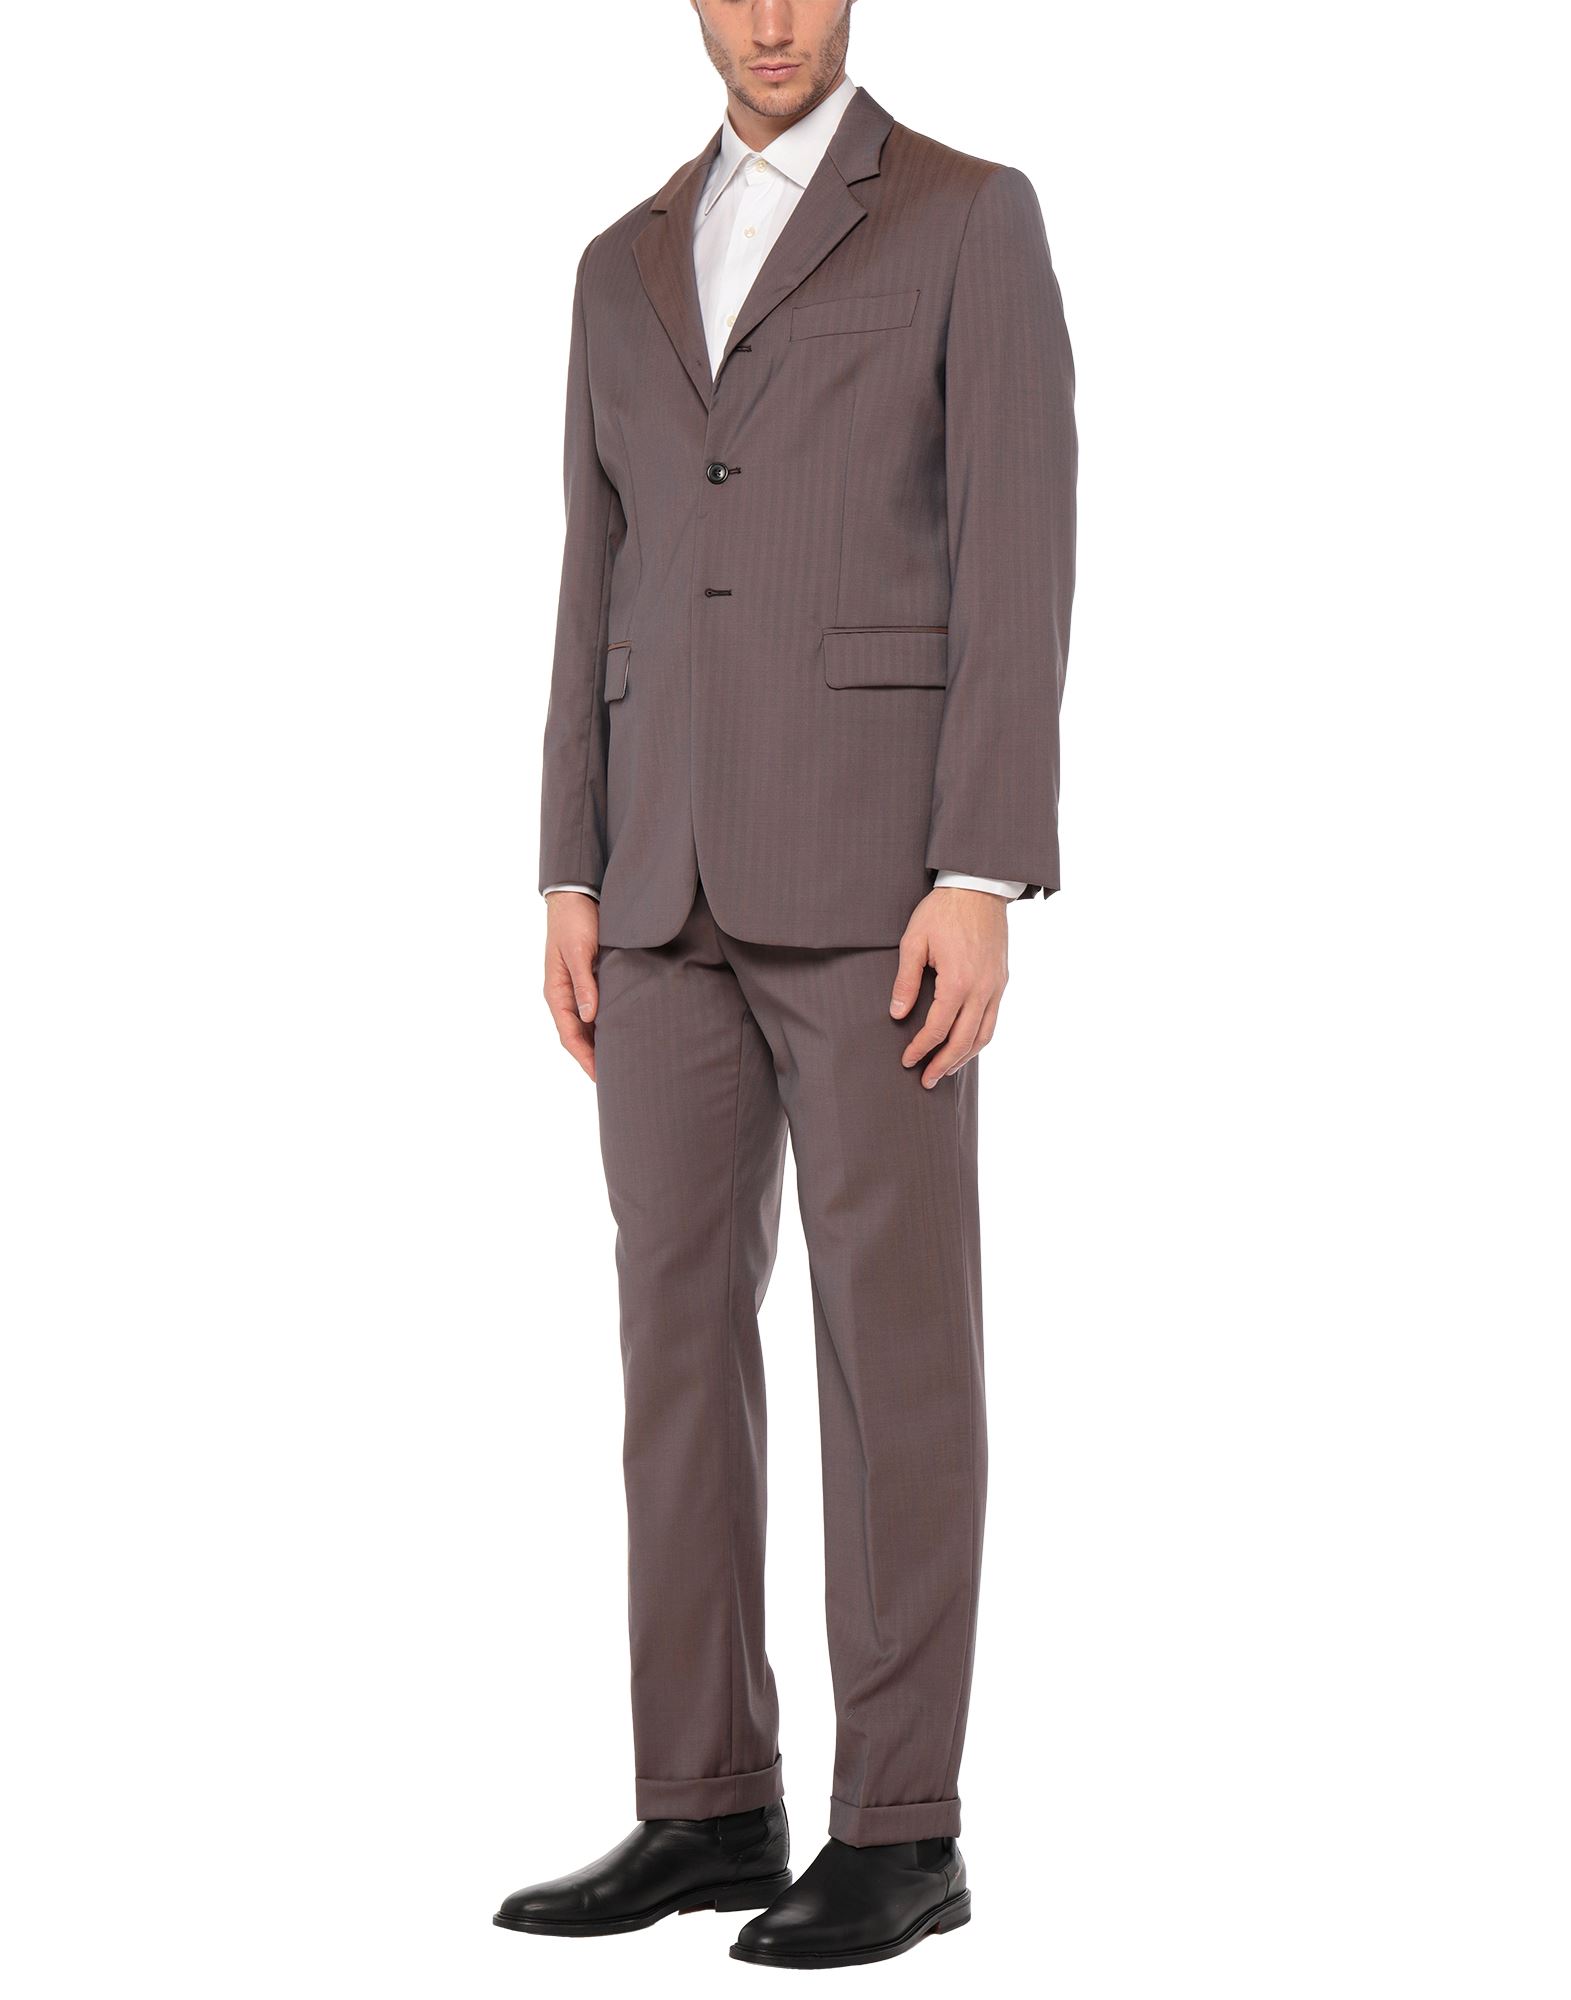 Mauro Grifoni Suits In Dove Grey